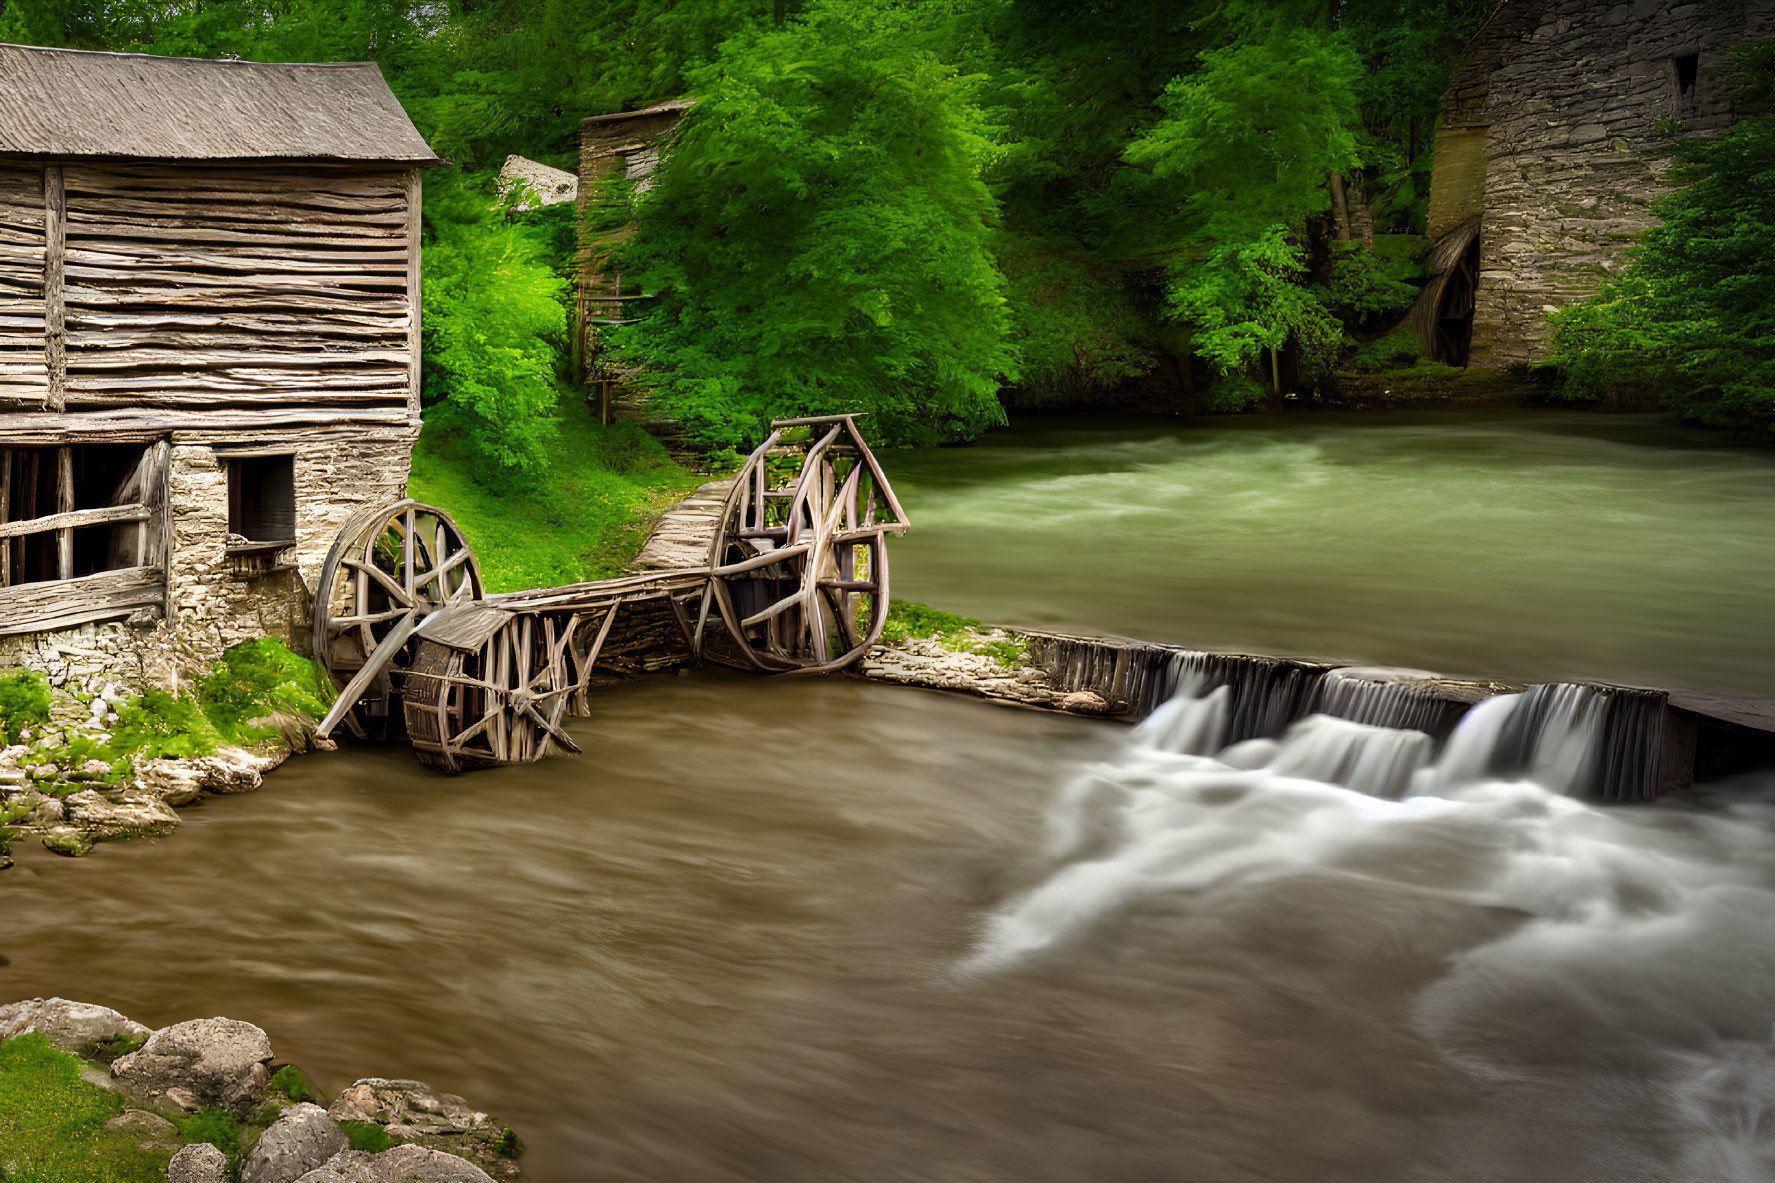 Rustic watermill by river with wooden wheels and waterfall